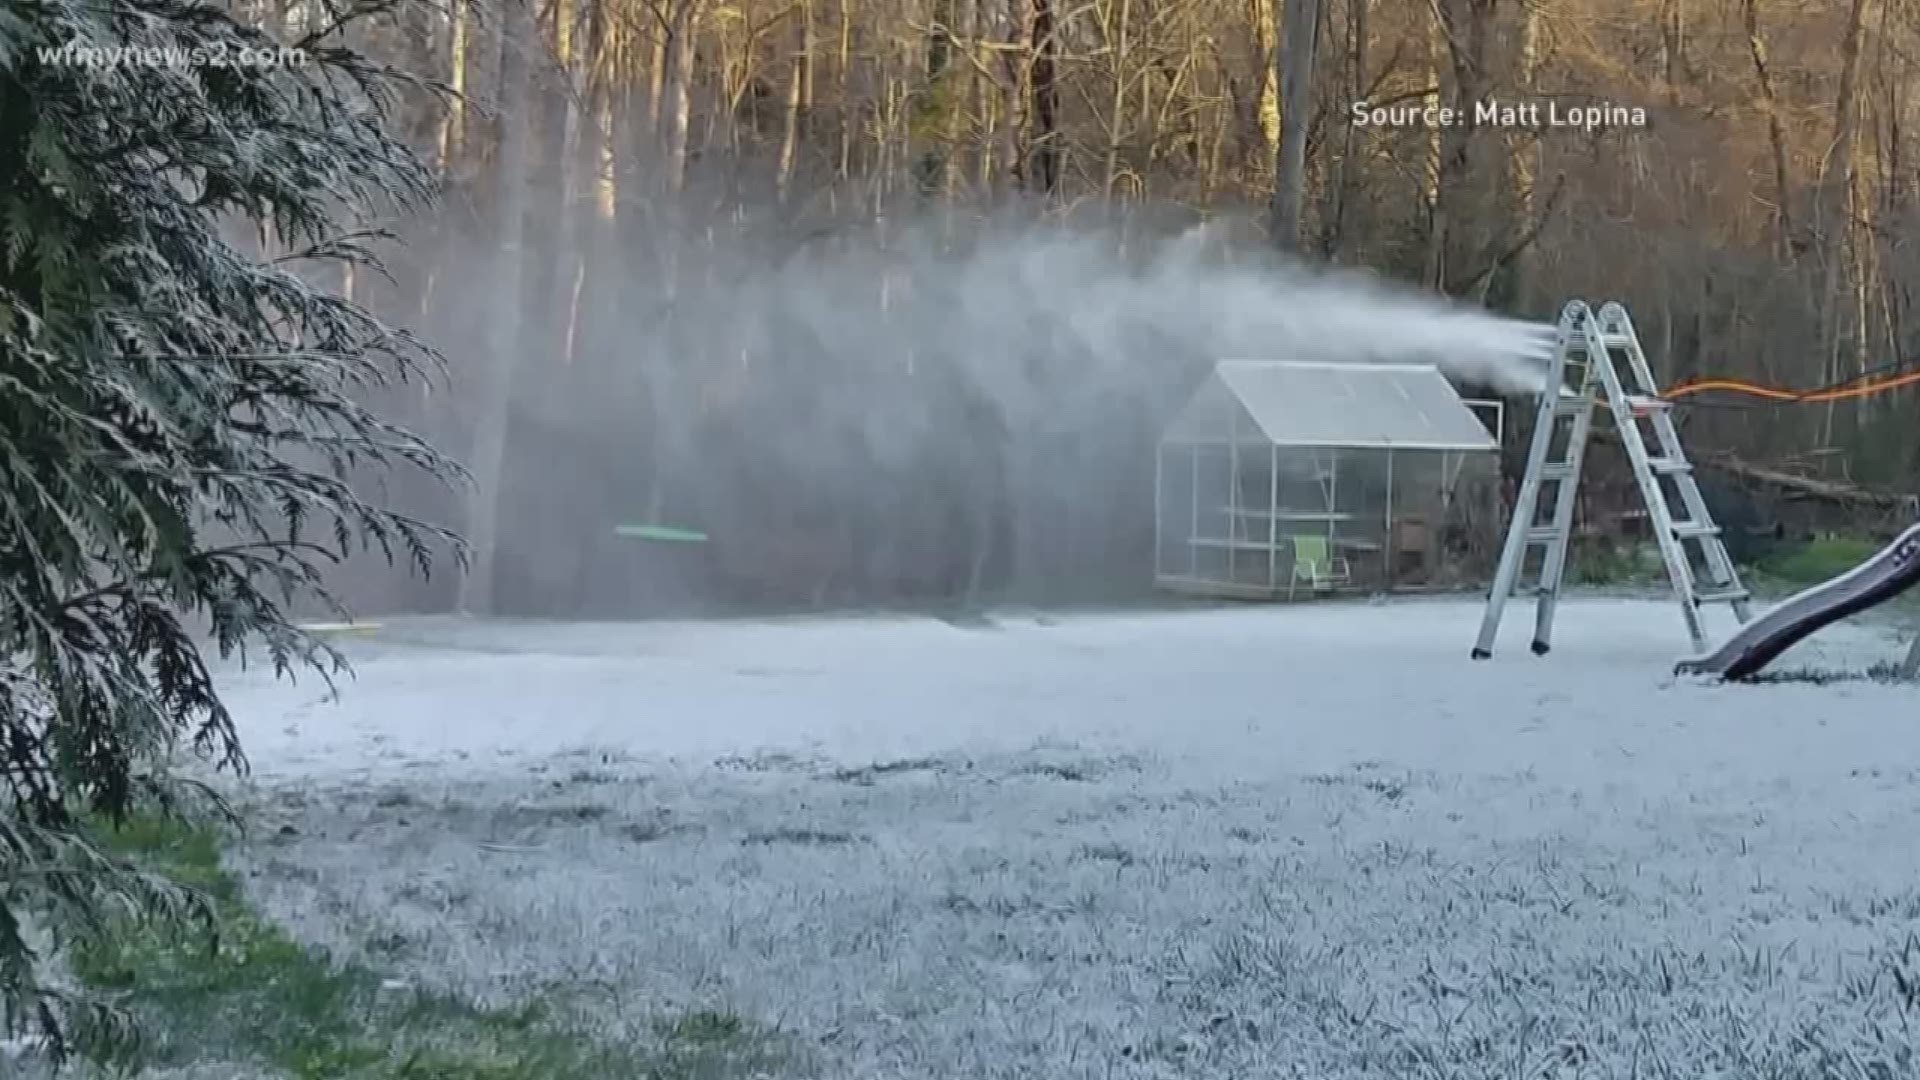 Matt Lopina used an pressure washer and an air compressor to turn his backyard into a sledding hill.